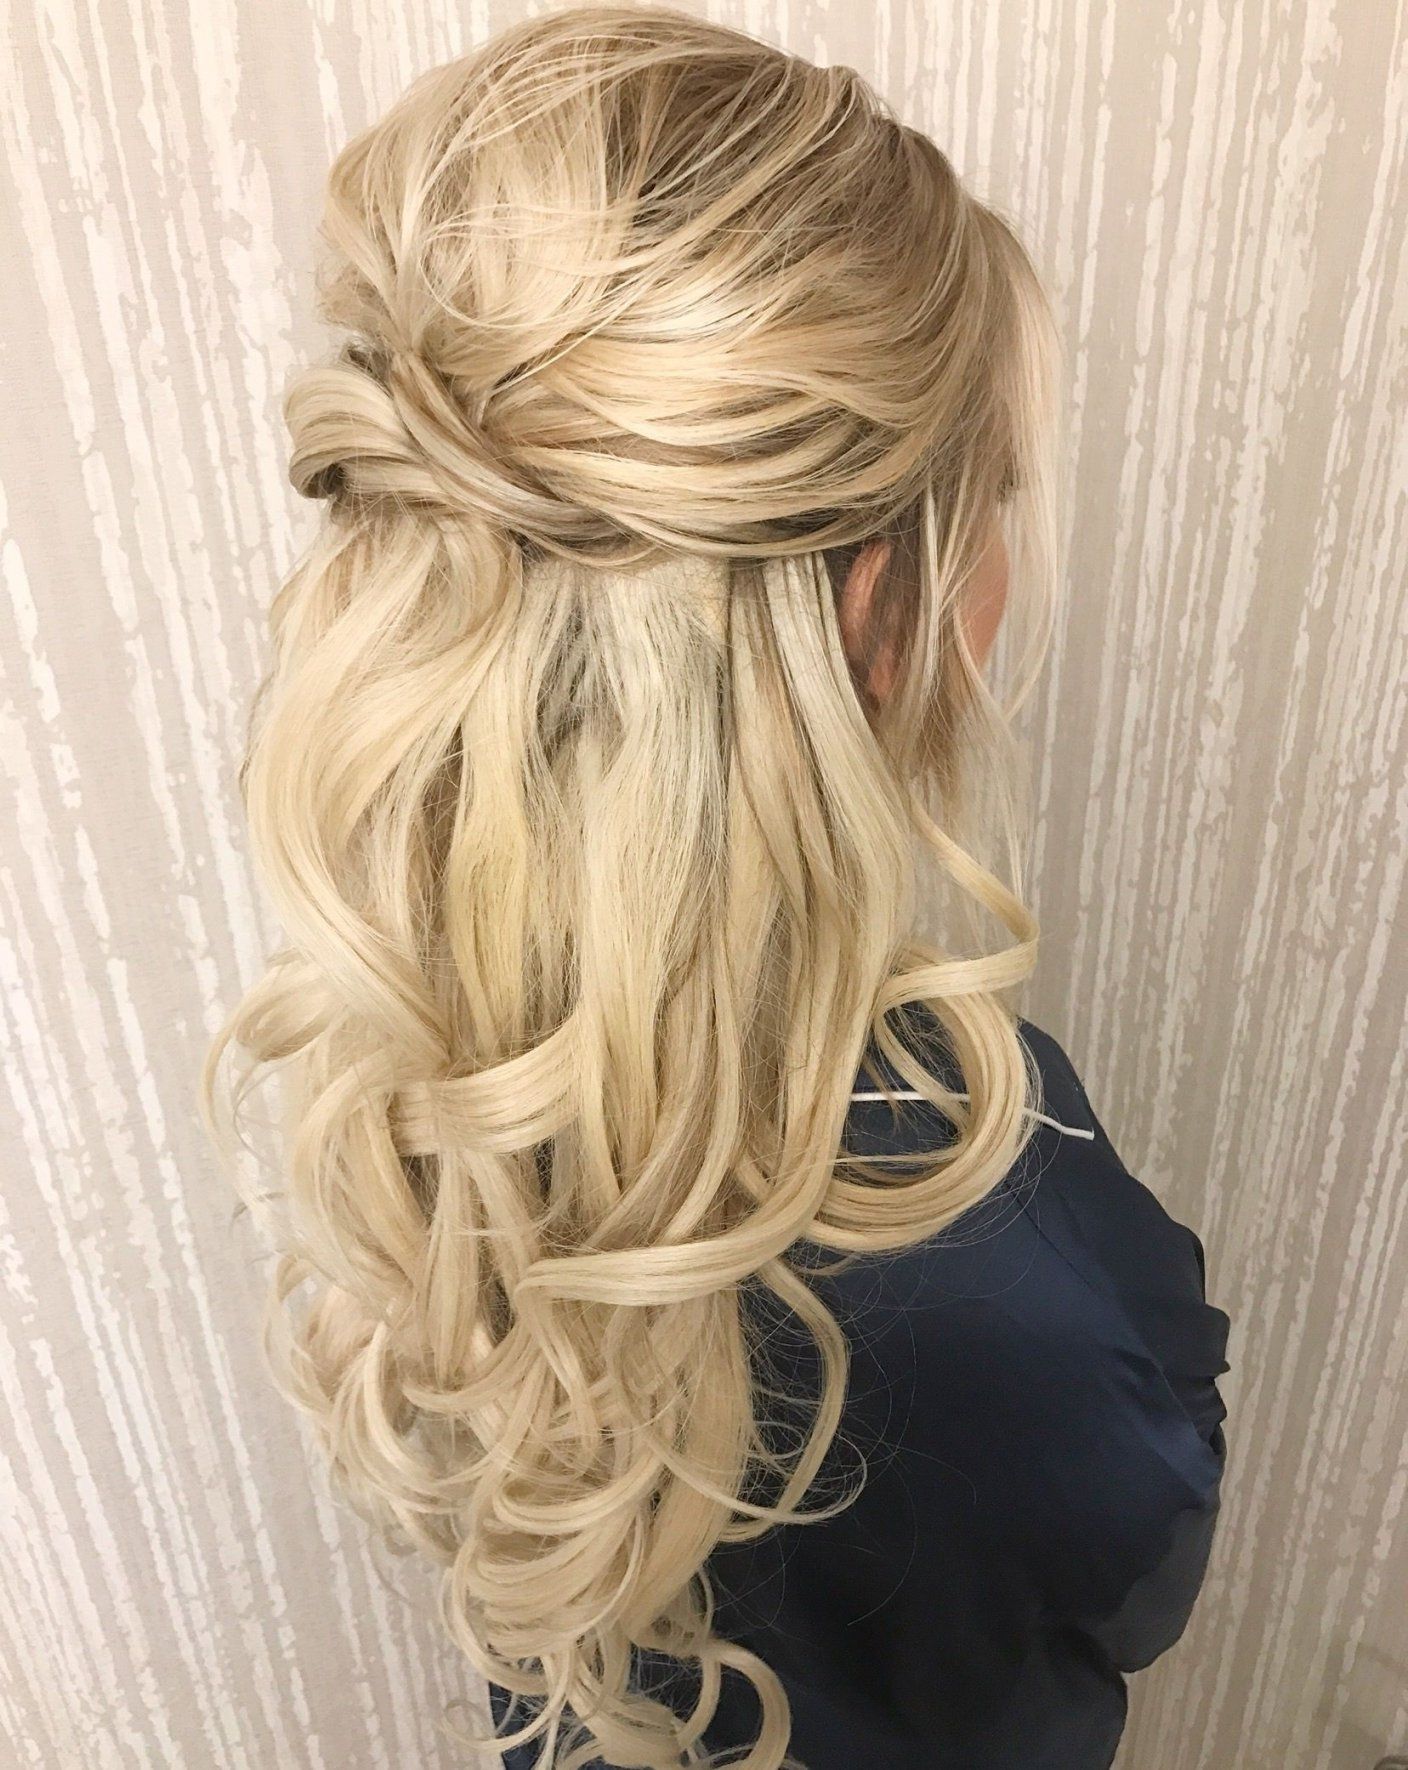 Best And Newest Wedding Hairstyles For Long And Thin Hair With Half Up Half Down Wedding Hairstyles For Thin Hair Archives (View 13 of 15)